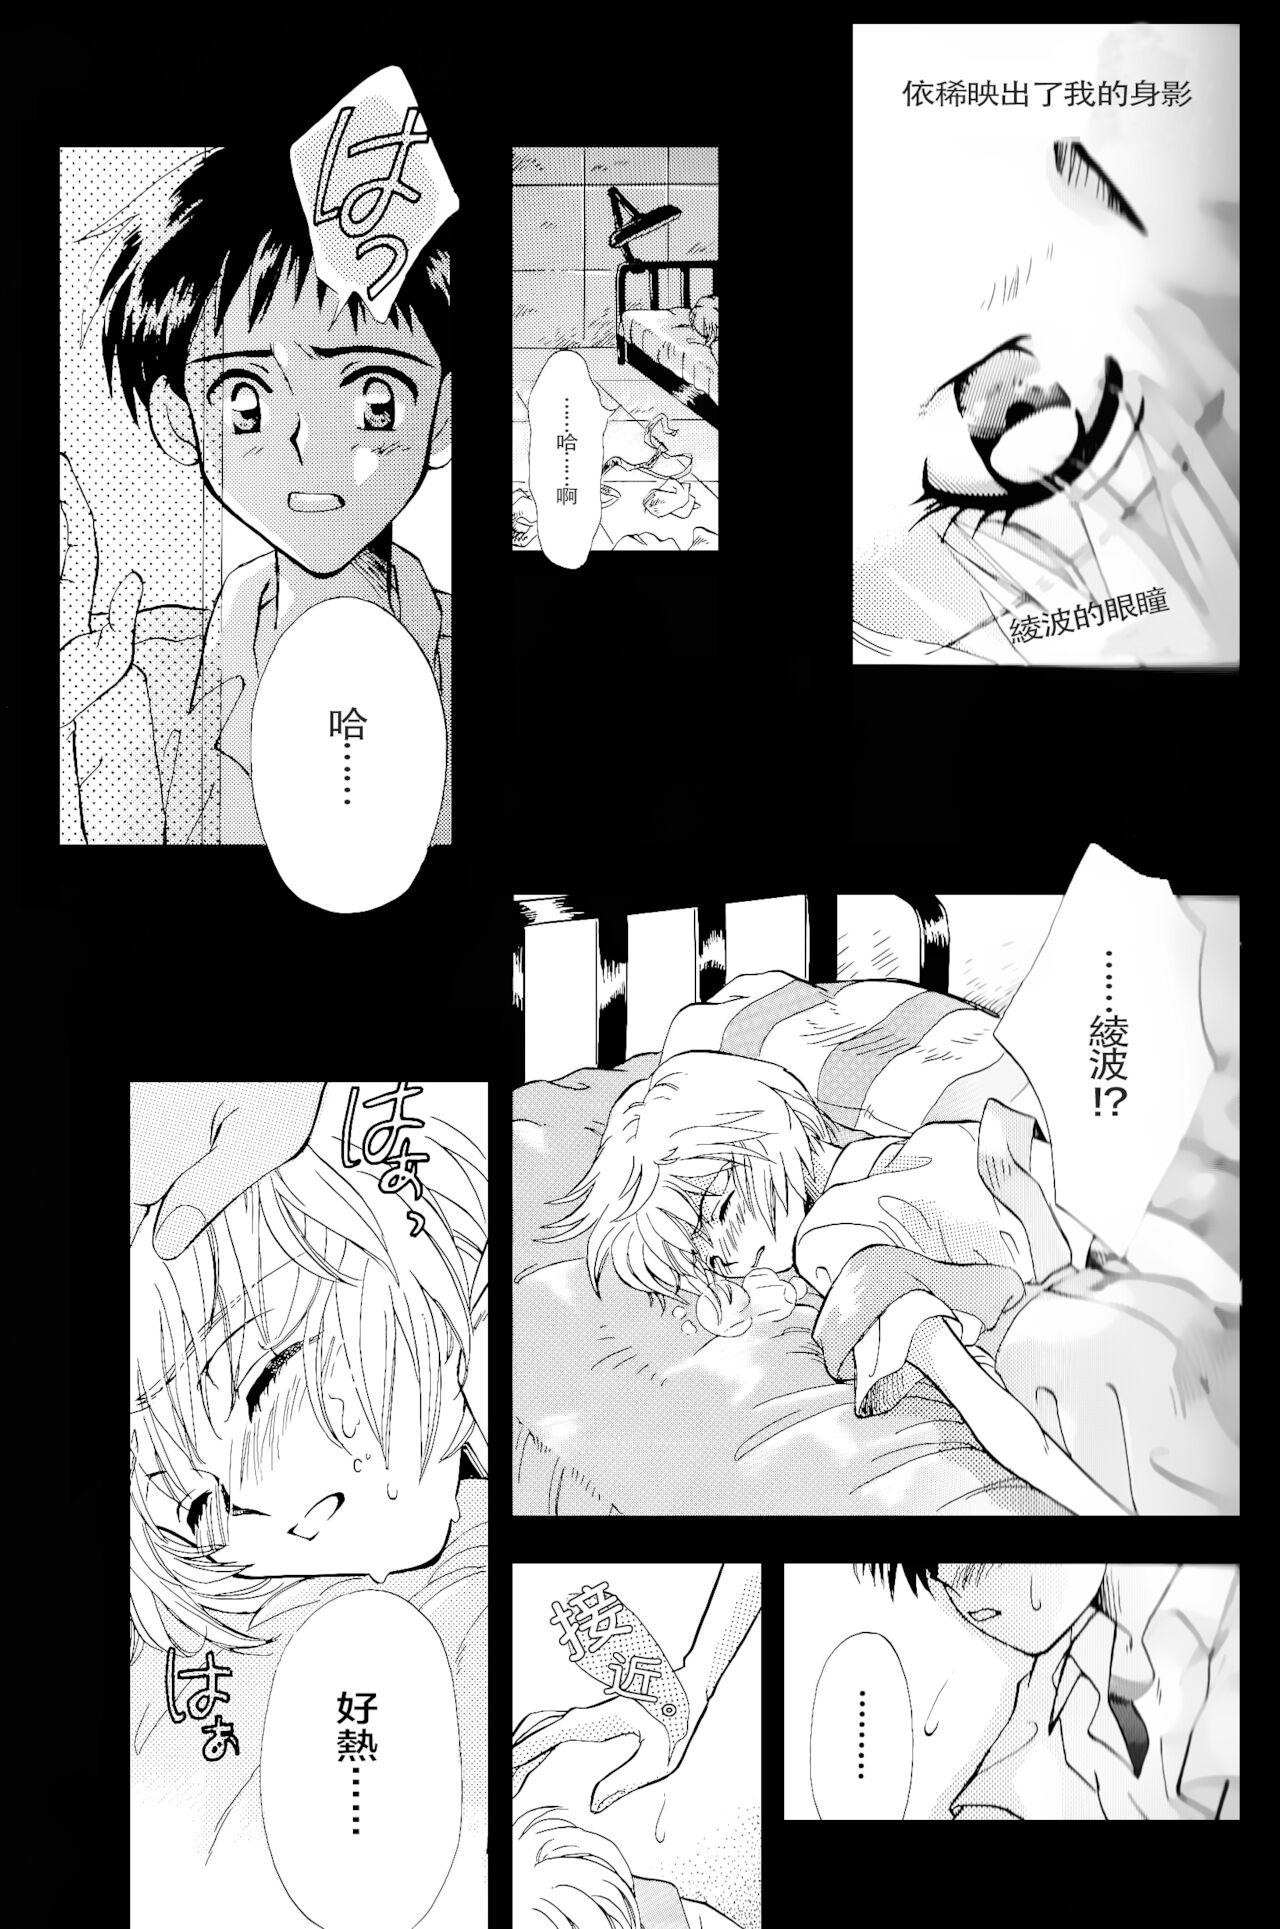 The PEPPY ANGEL episode0.1 - Neon genesis evangelion Pure 18 - Page 5